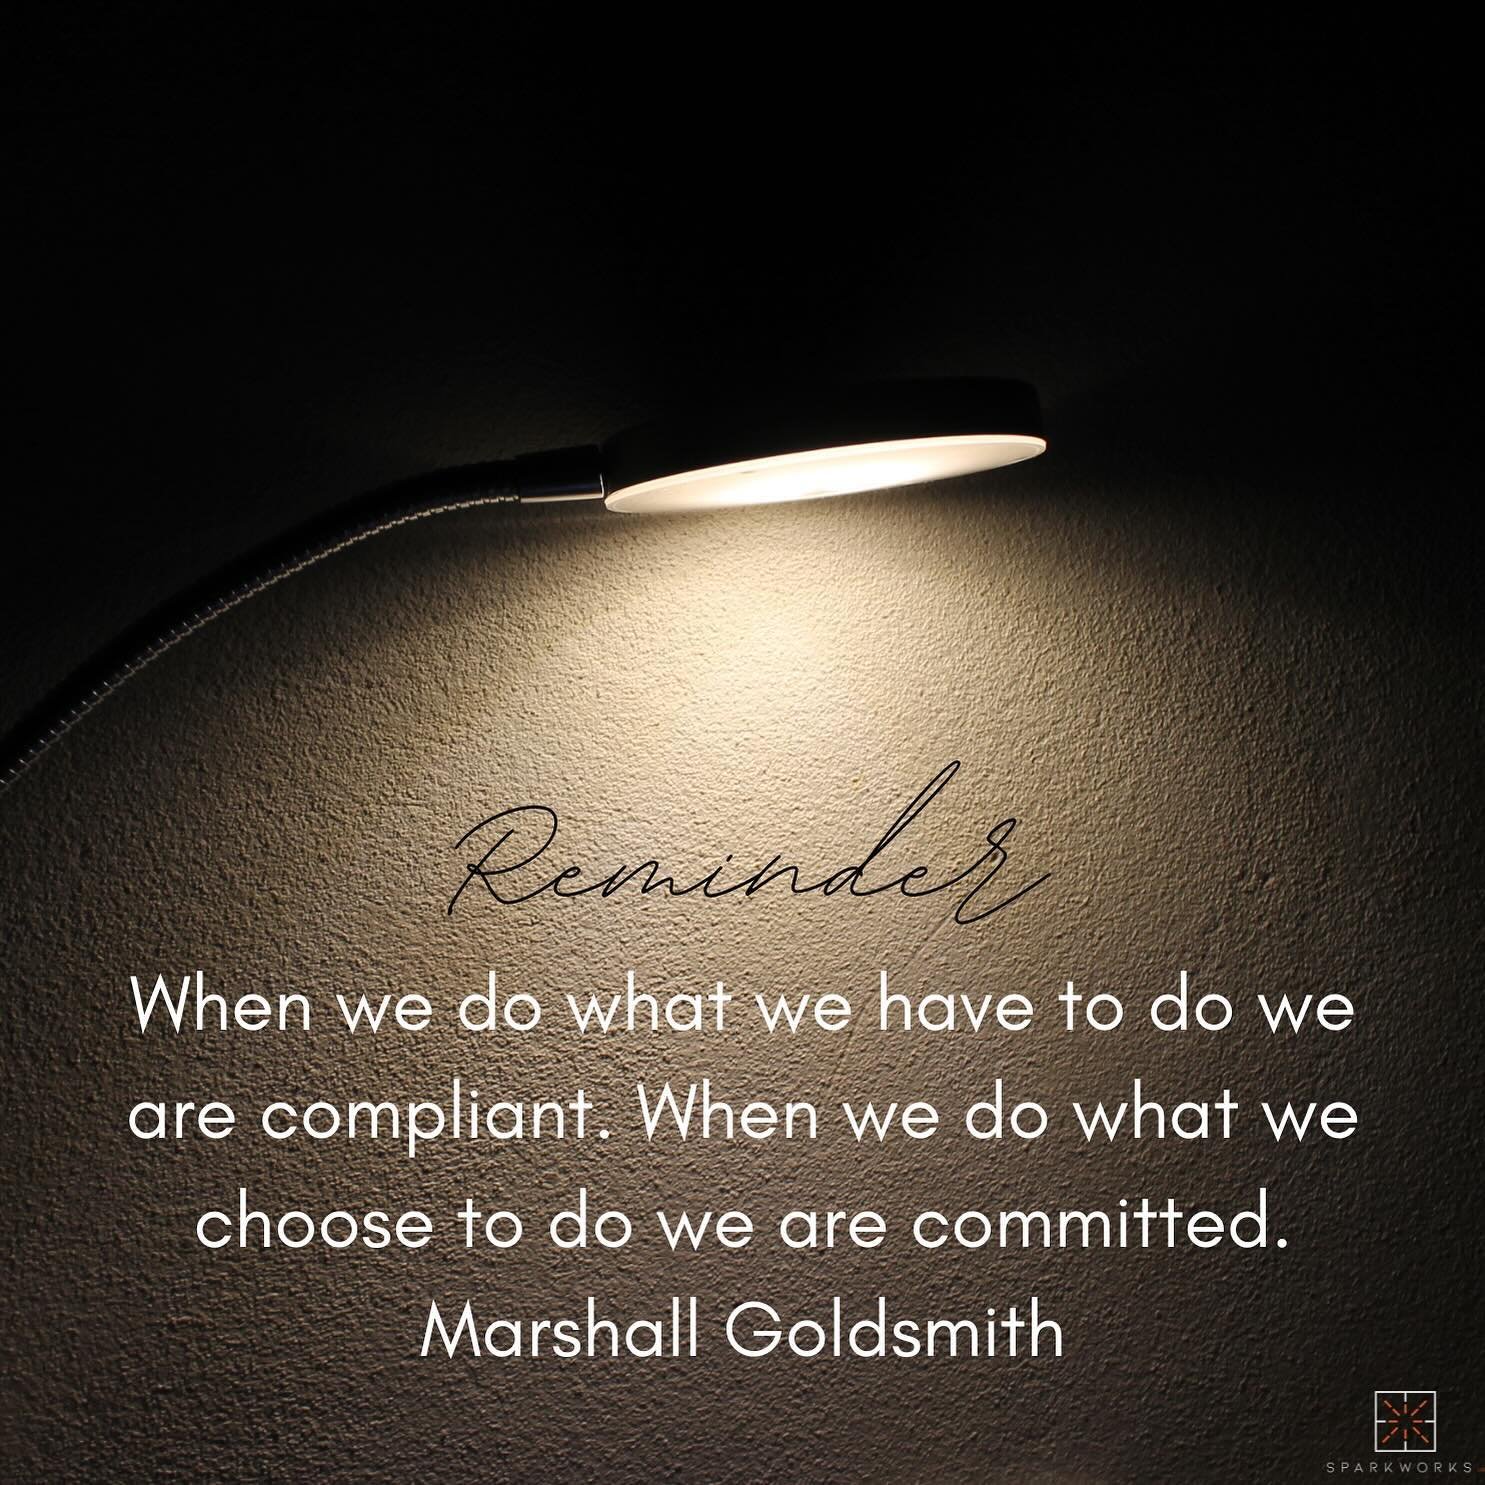 Great quote from a world leading coach. @coachgoldsmith